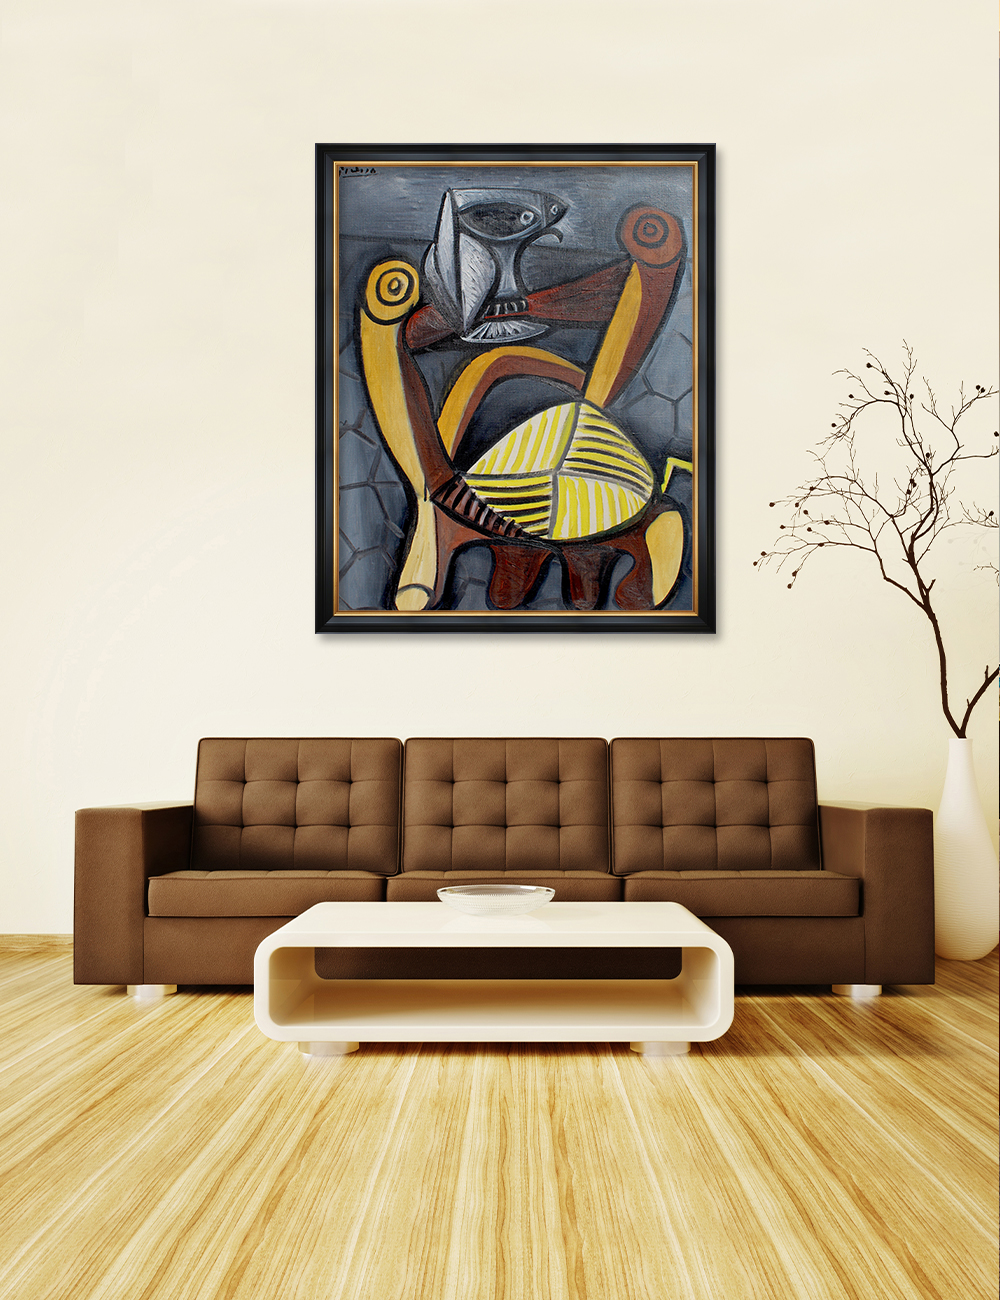 DECORARTS Owl on the Chair by Pablo Picasso, Giclee Print on Acid Free  Canvas with Matching Solid Wood Frame, Framed Artwork for Wall Decor. Total  Framed Size: W 35